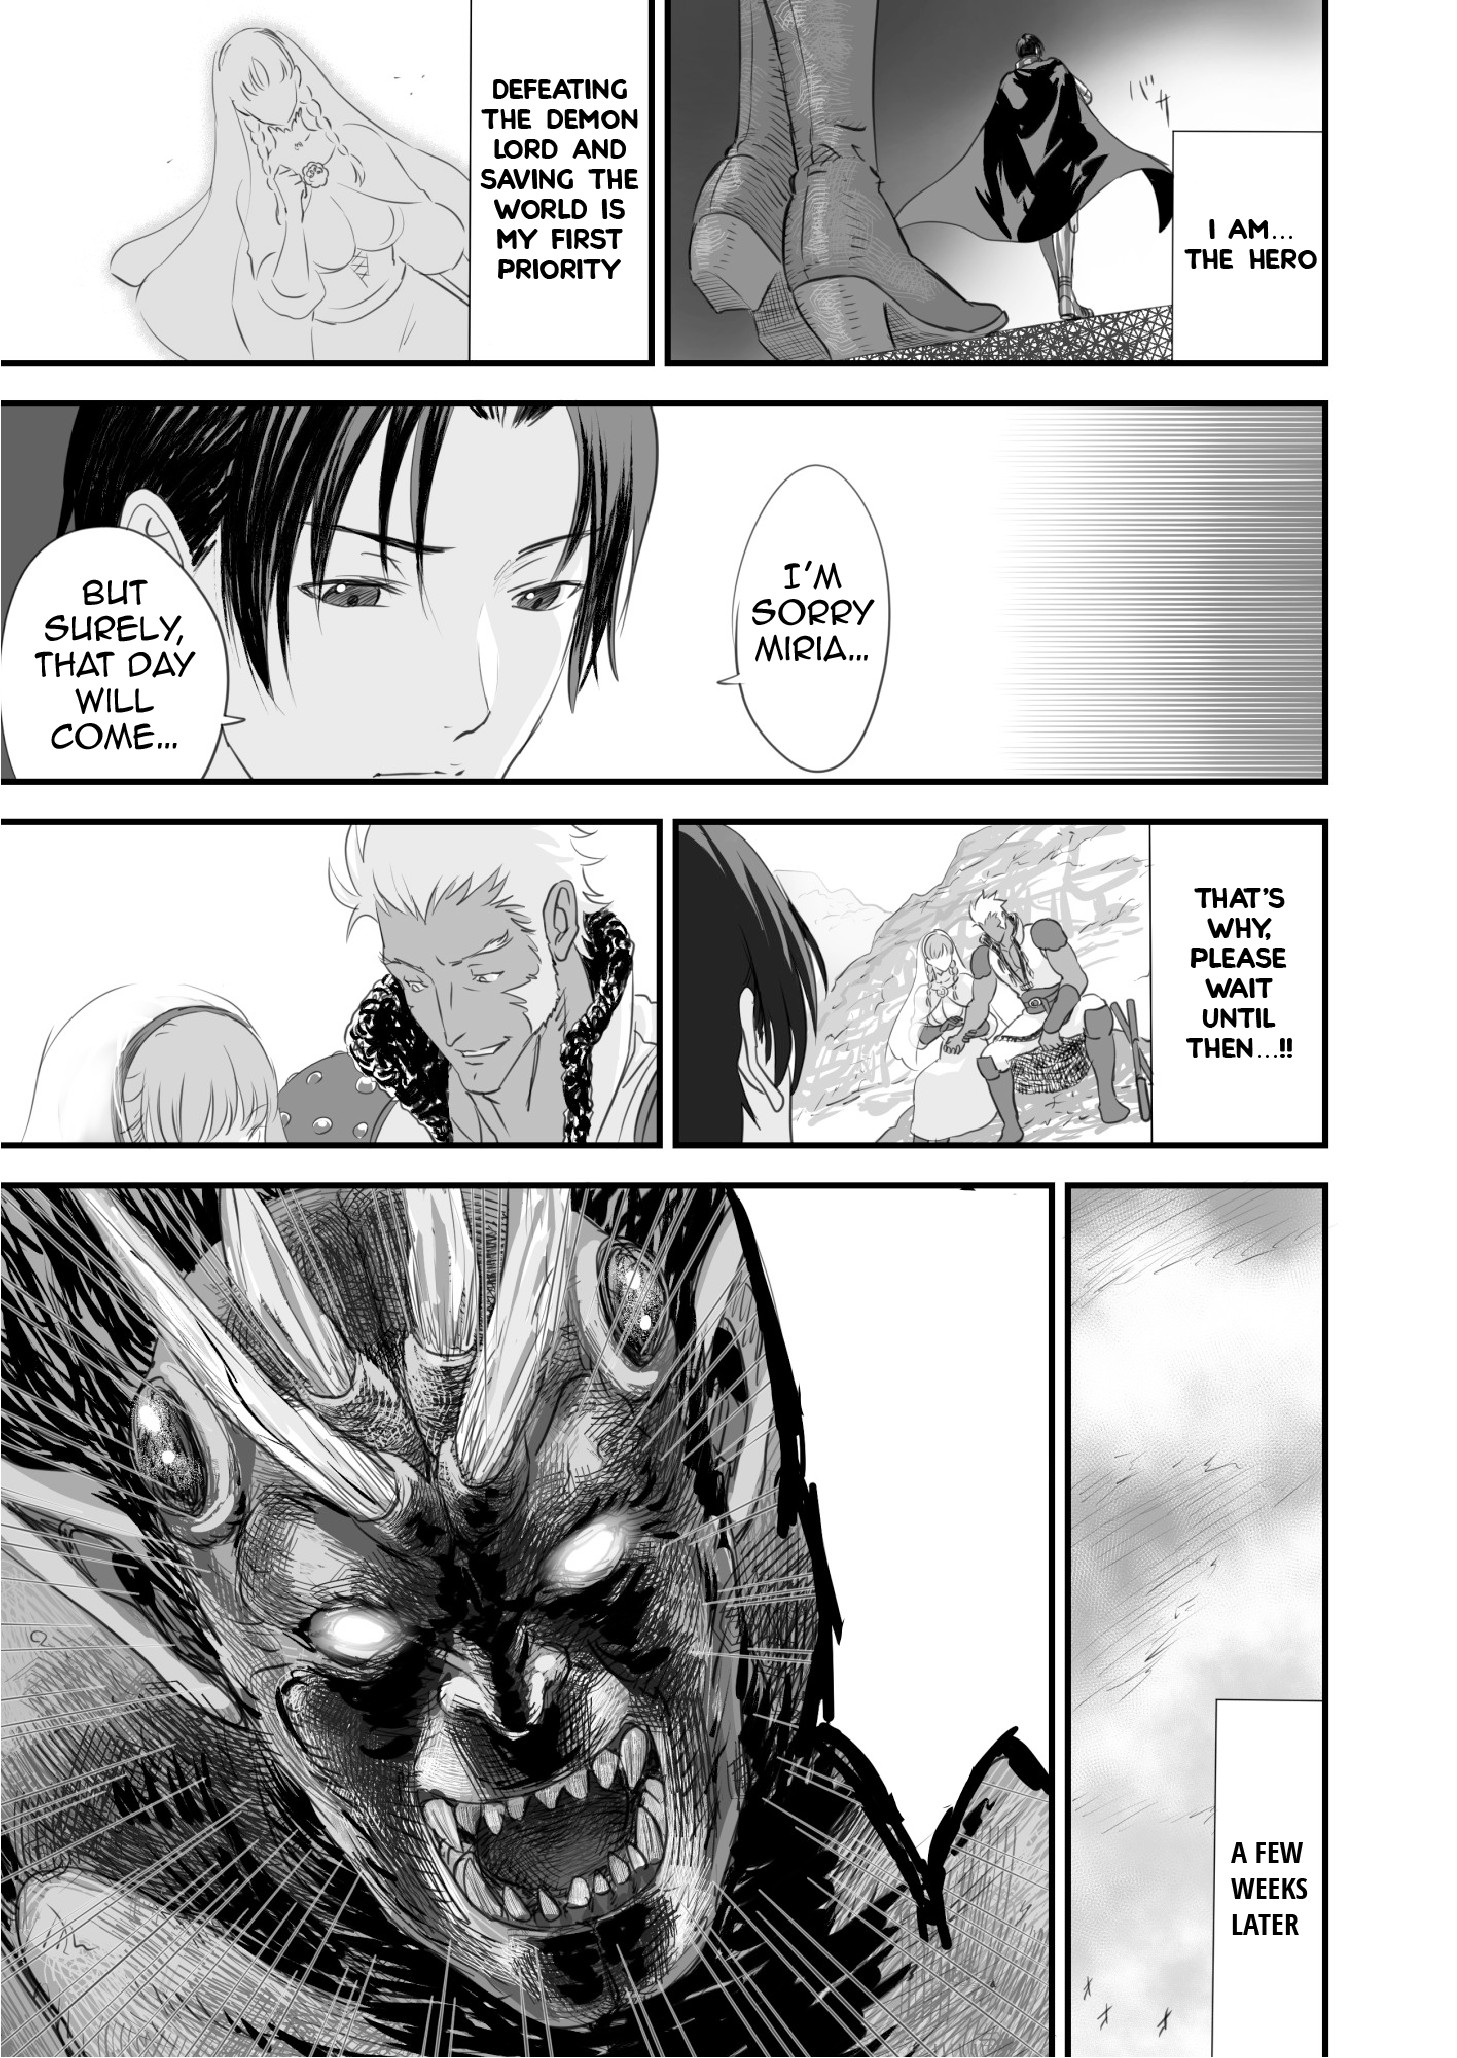 Page 10 | The End of the Line for the Cuckold Hero - Original Hentai  Doujinshi by Yuugen Sougen - Pururin, Free Online Hentai Manga and  Doujinshi Reader